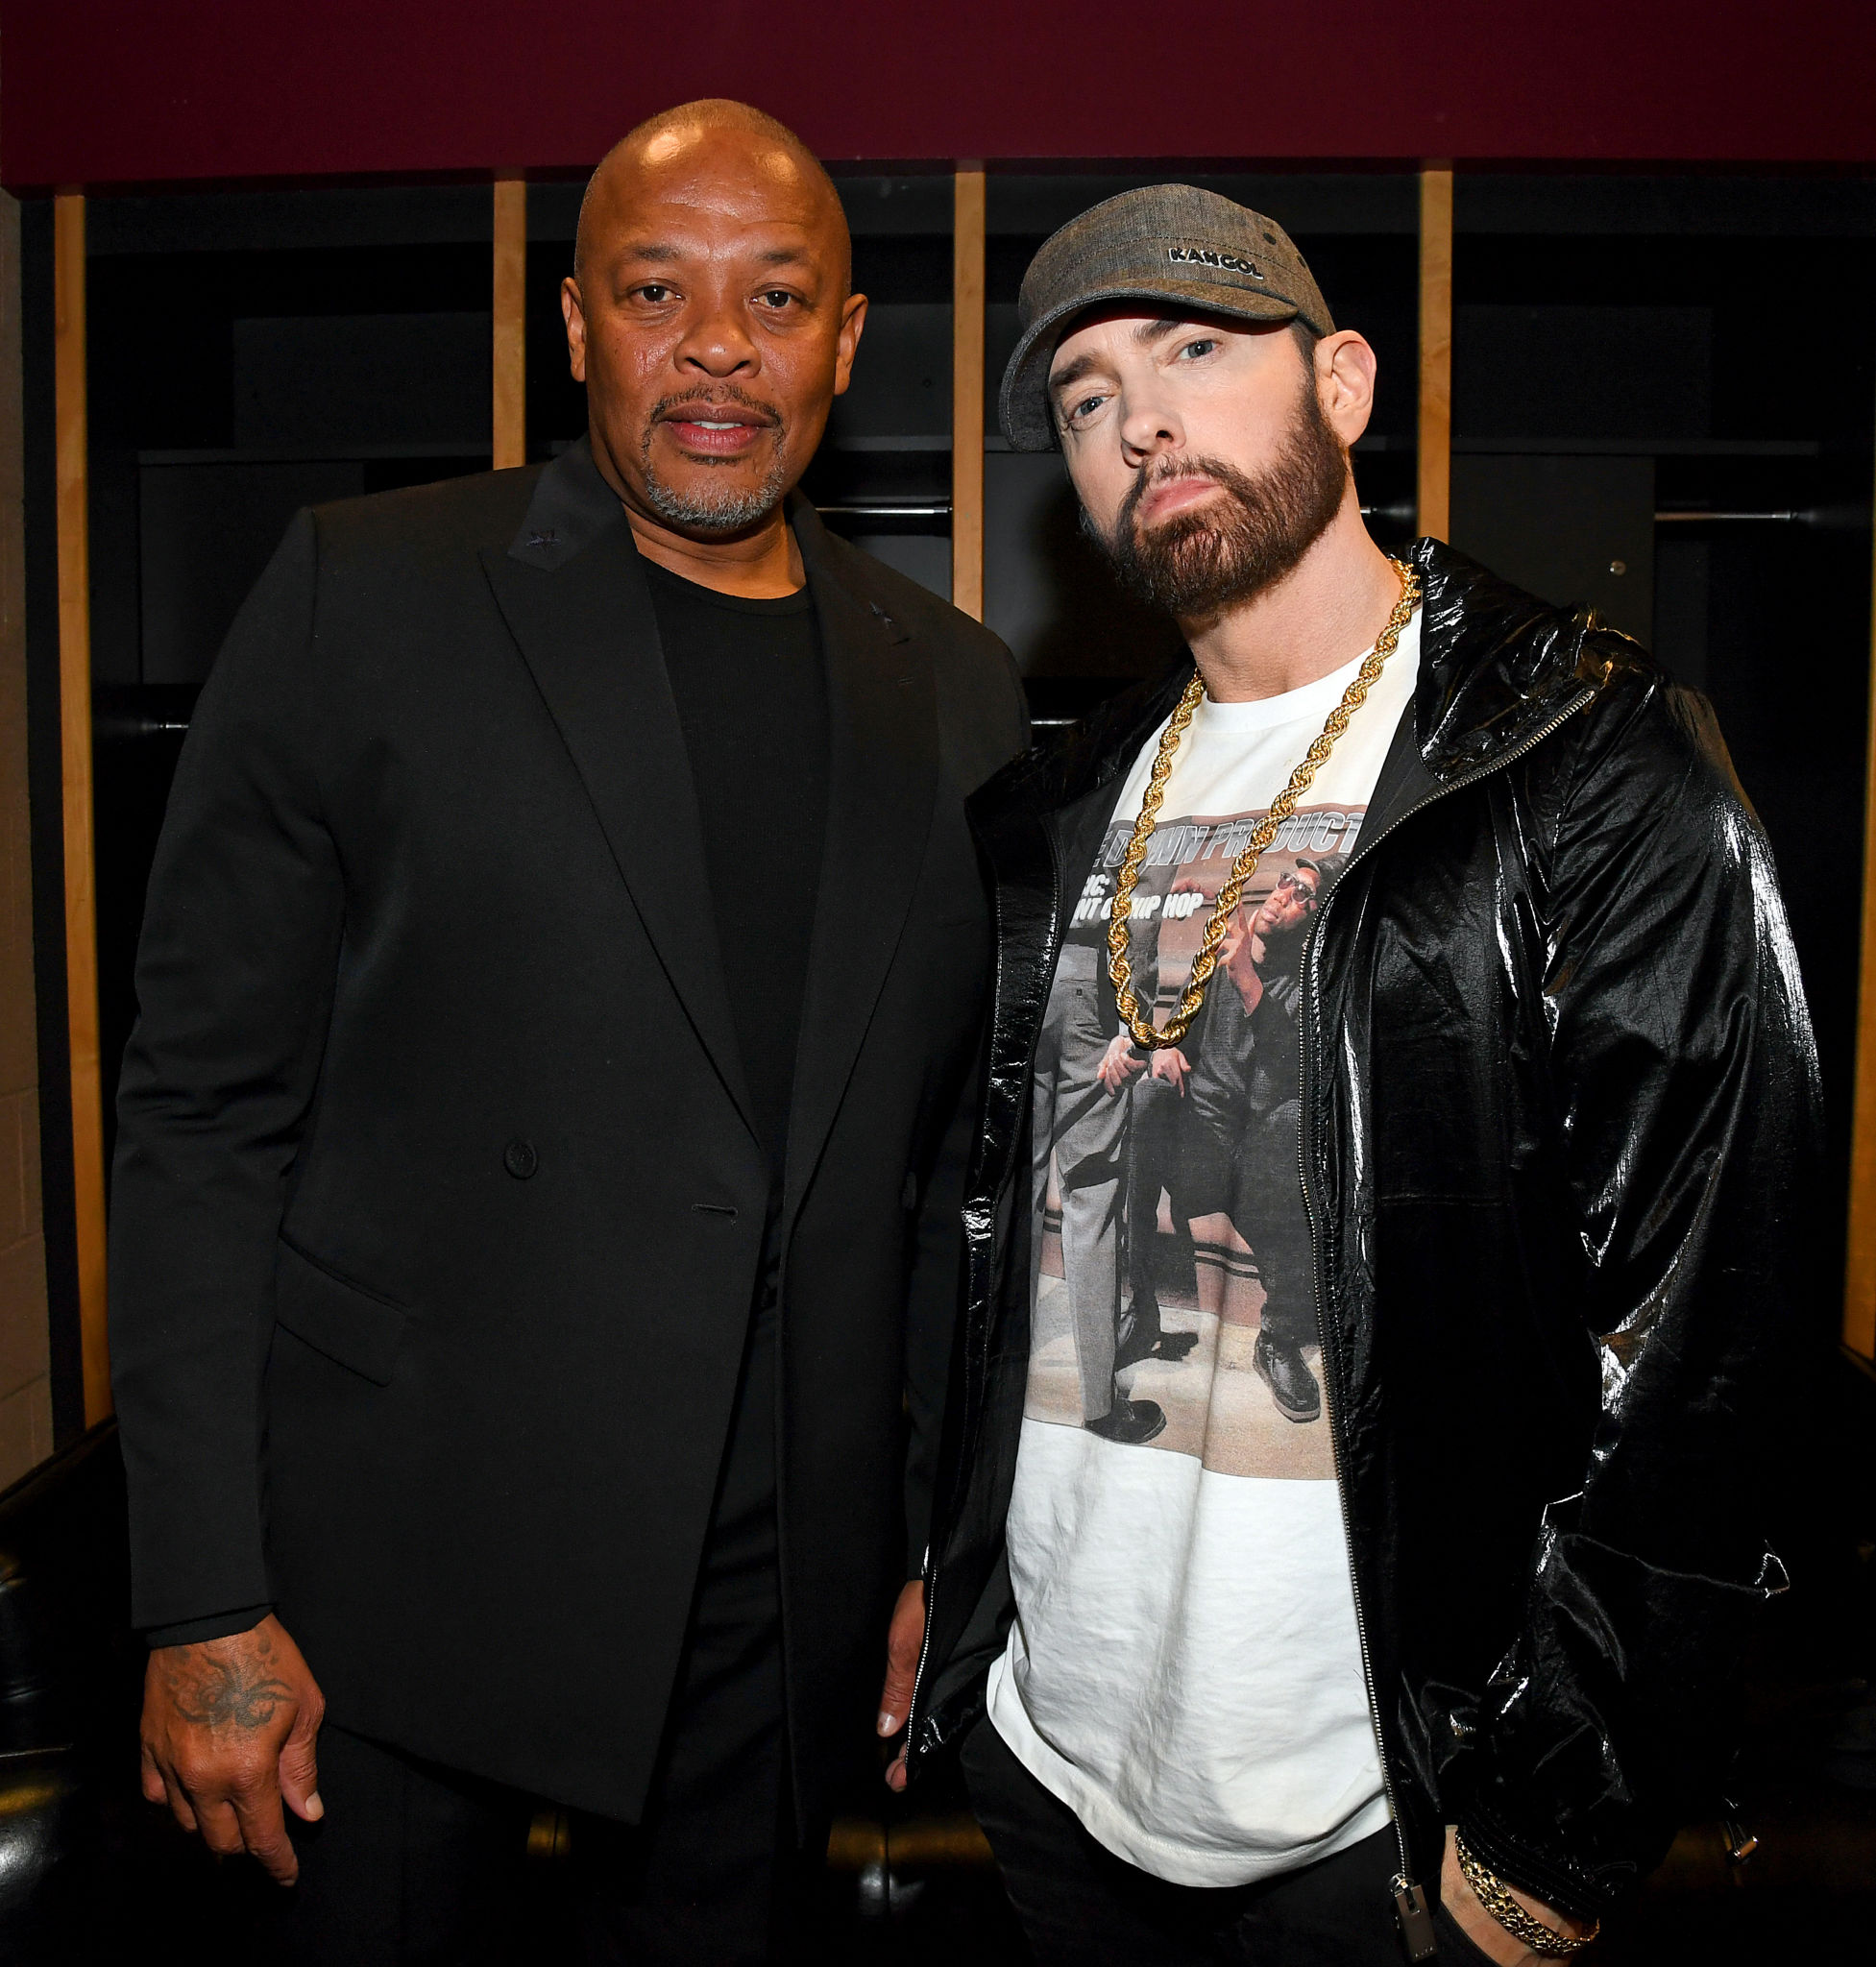 CLEVELAND, OHIO - OCTOBER 30: Dr. Dre and Eminem pose backstage during the 36th Annual Rock & Roll Hall Of Fame Induction Ceremony at Rocket Mortgage Fieldhouse on October 30, 2021 in Cleveland, Ohio. (Photo by Kevin Mazur/Getty Images for The Rock and Roll Hall of Fame )